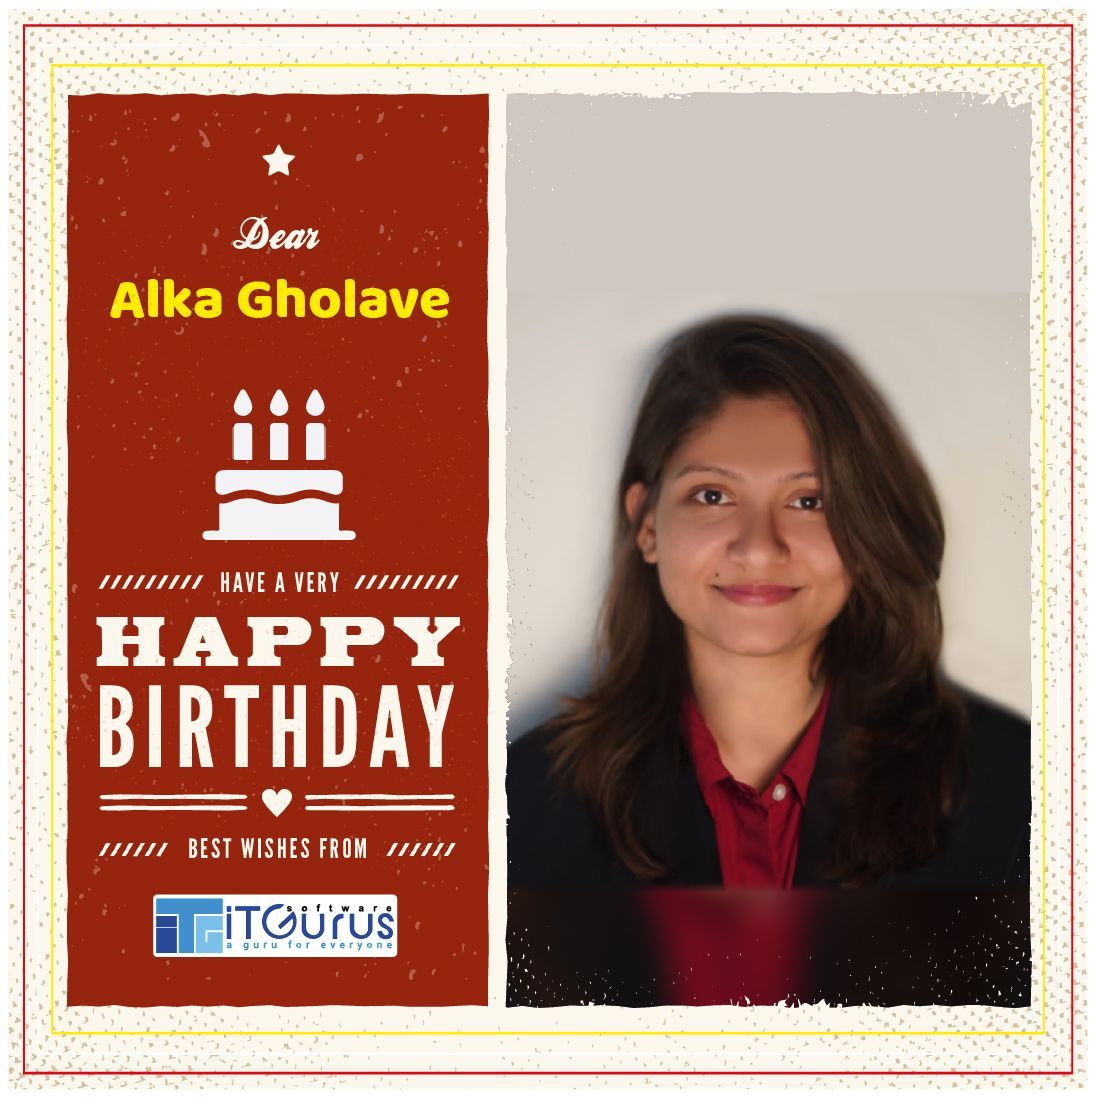 Another year, another adventure! 
Happy Birthday to @ Alka Gholave from Team iT Gurus Software!

#birthday #birthdaycake #birthdayparty #birthdaycakes #birthdayballoons #birthdaydecoration #happybd #happybday #birthdayinoffice